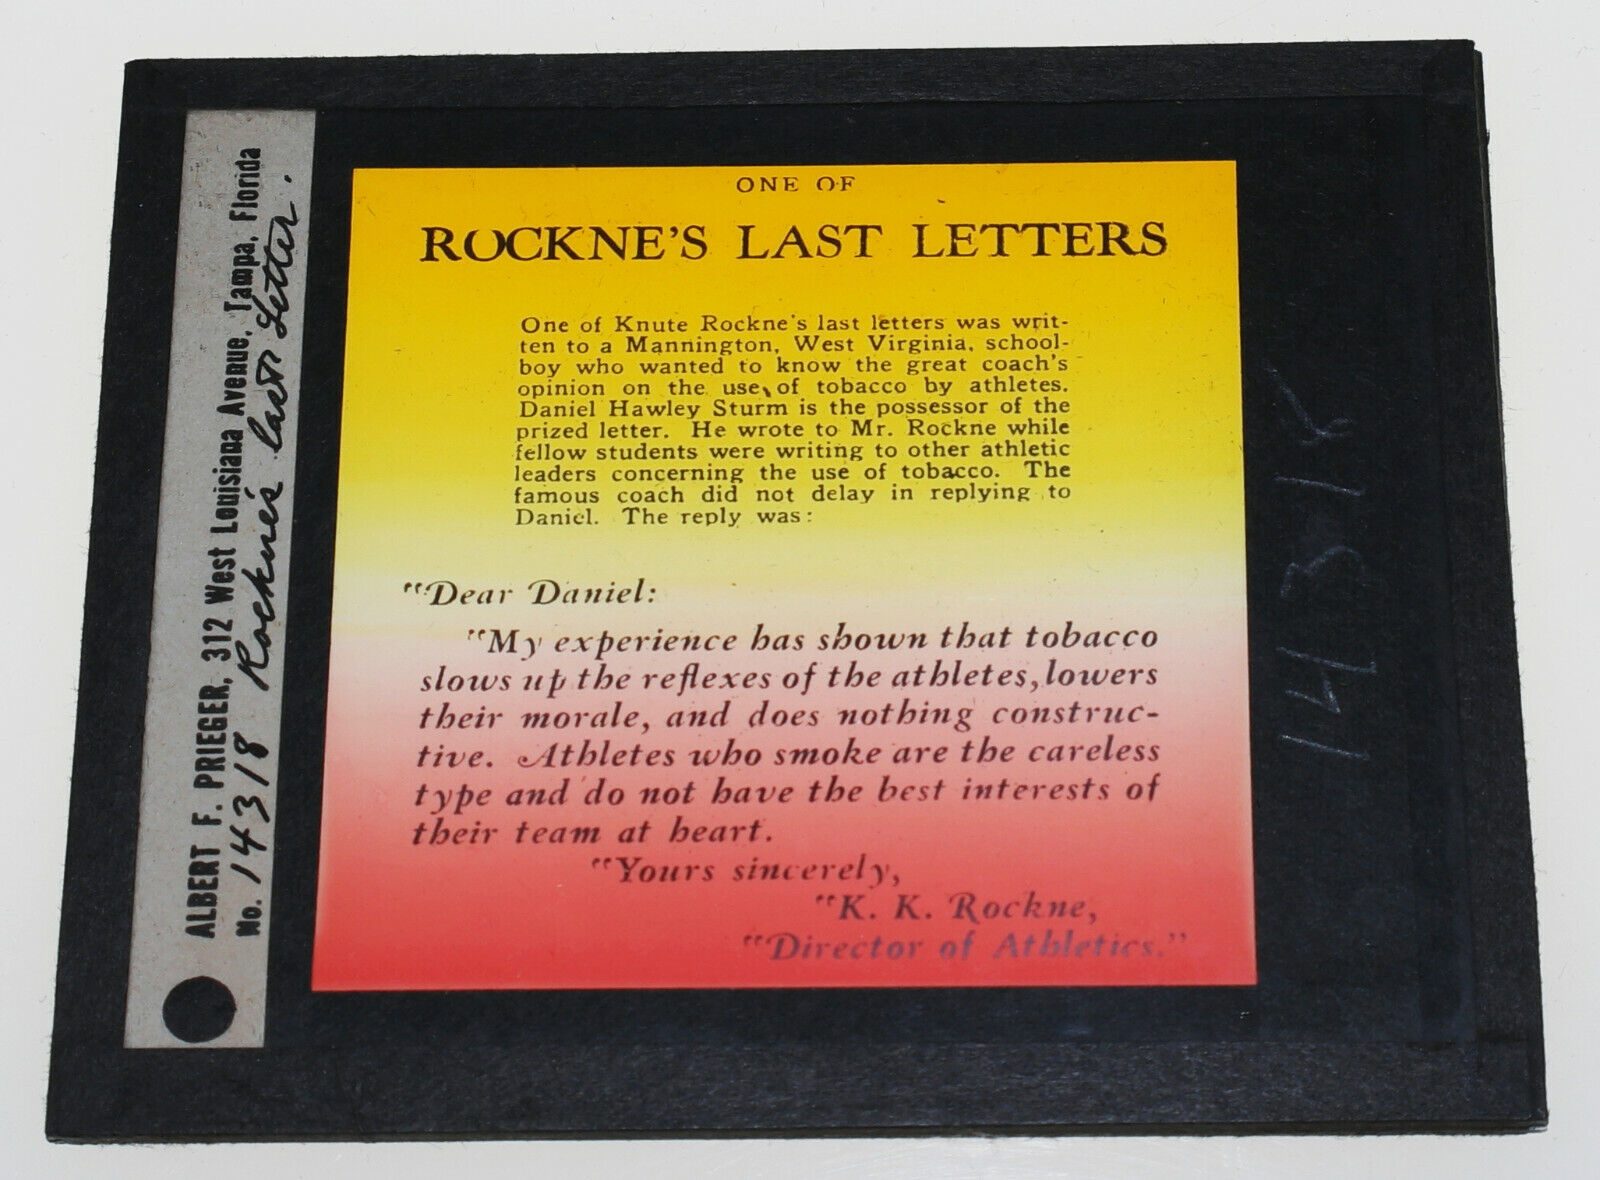 KNUTE ROCKNE 1920s tobacco related movie advertising GLASS SLIDE